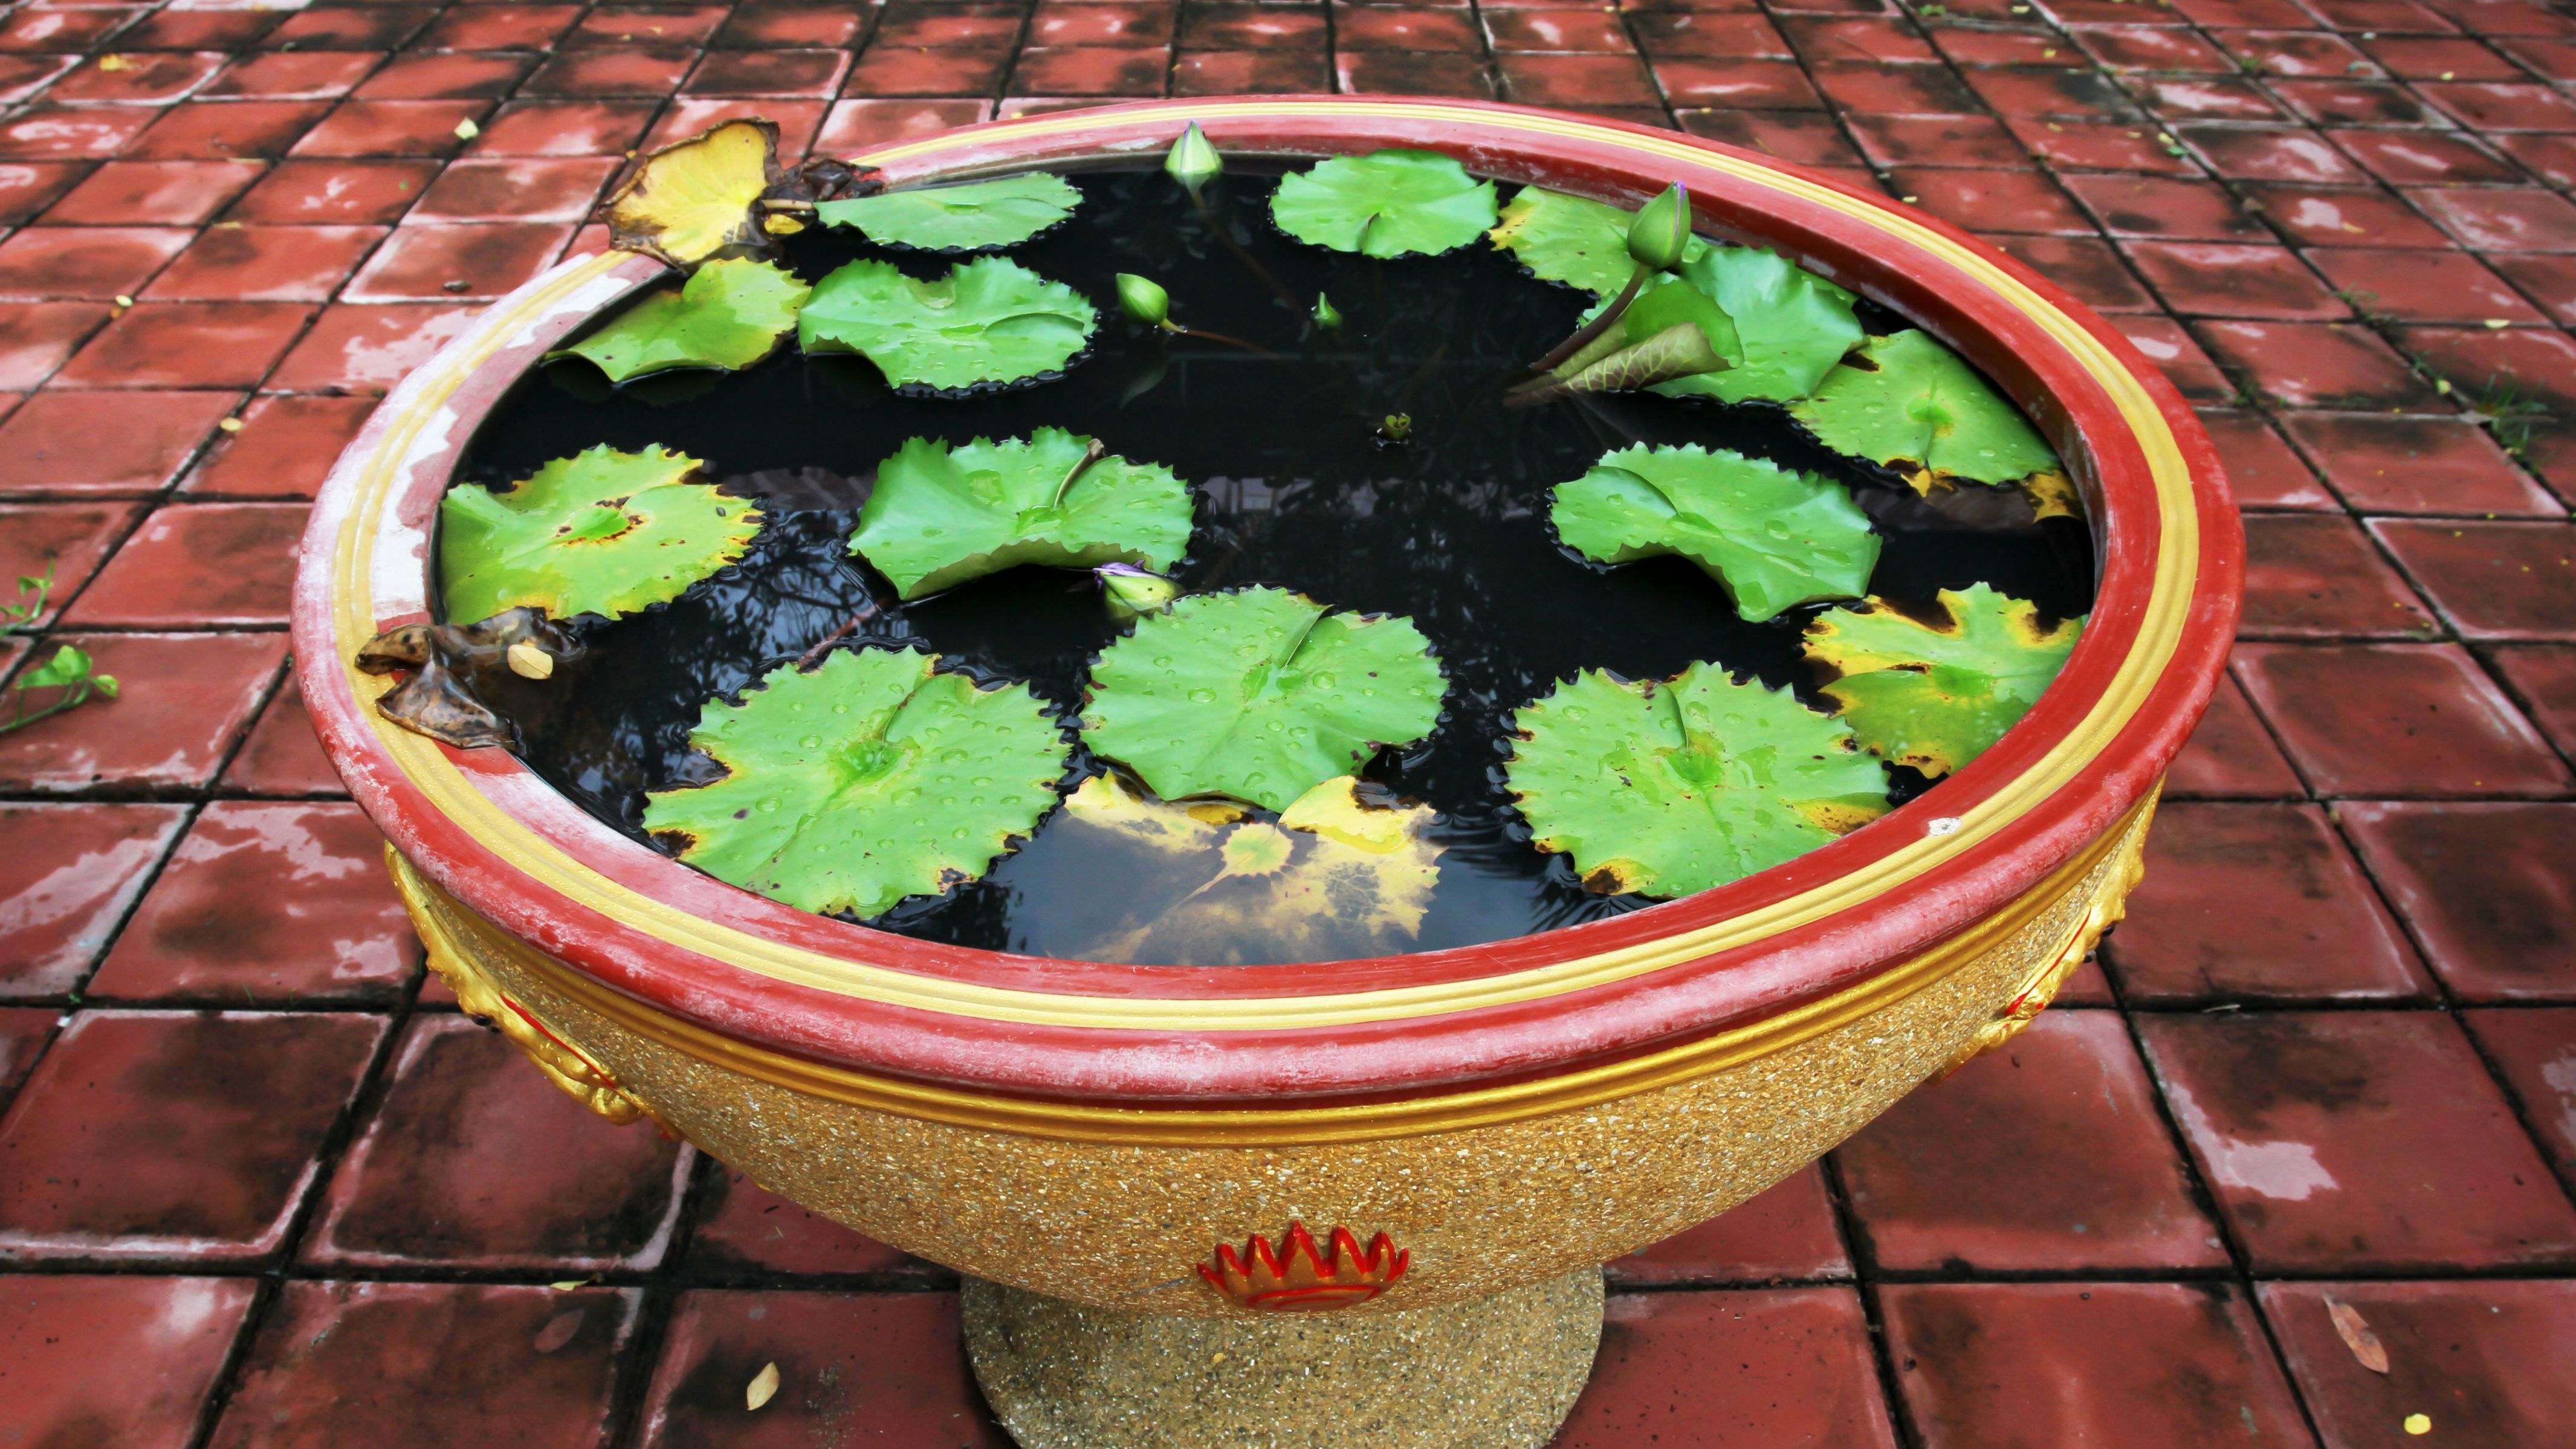 How to decorate your garden pond?